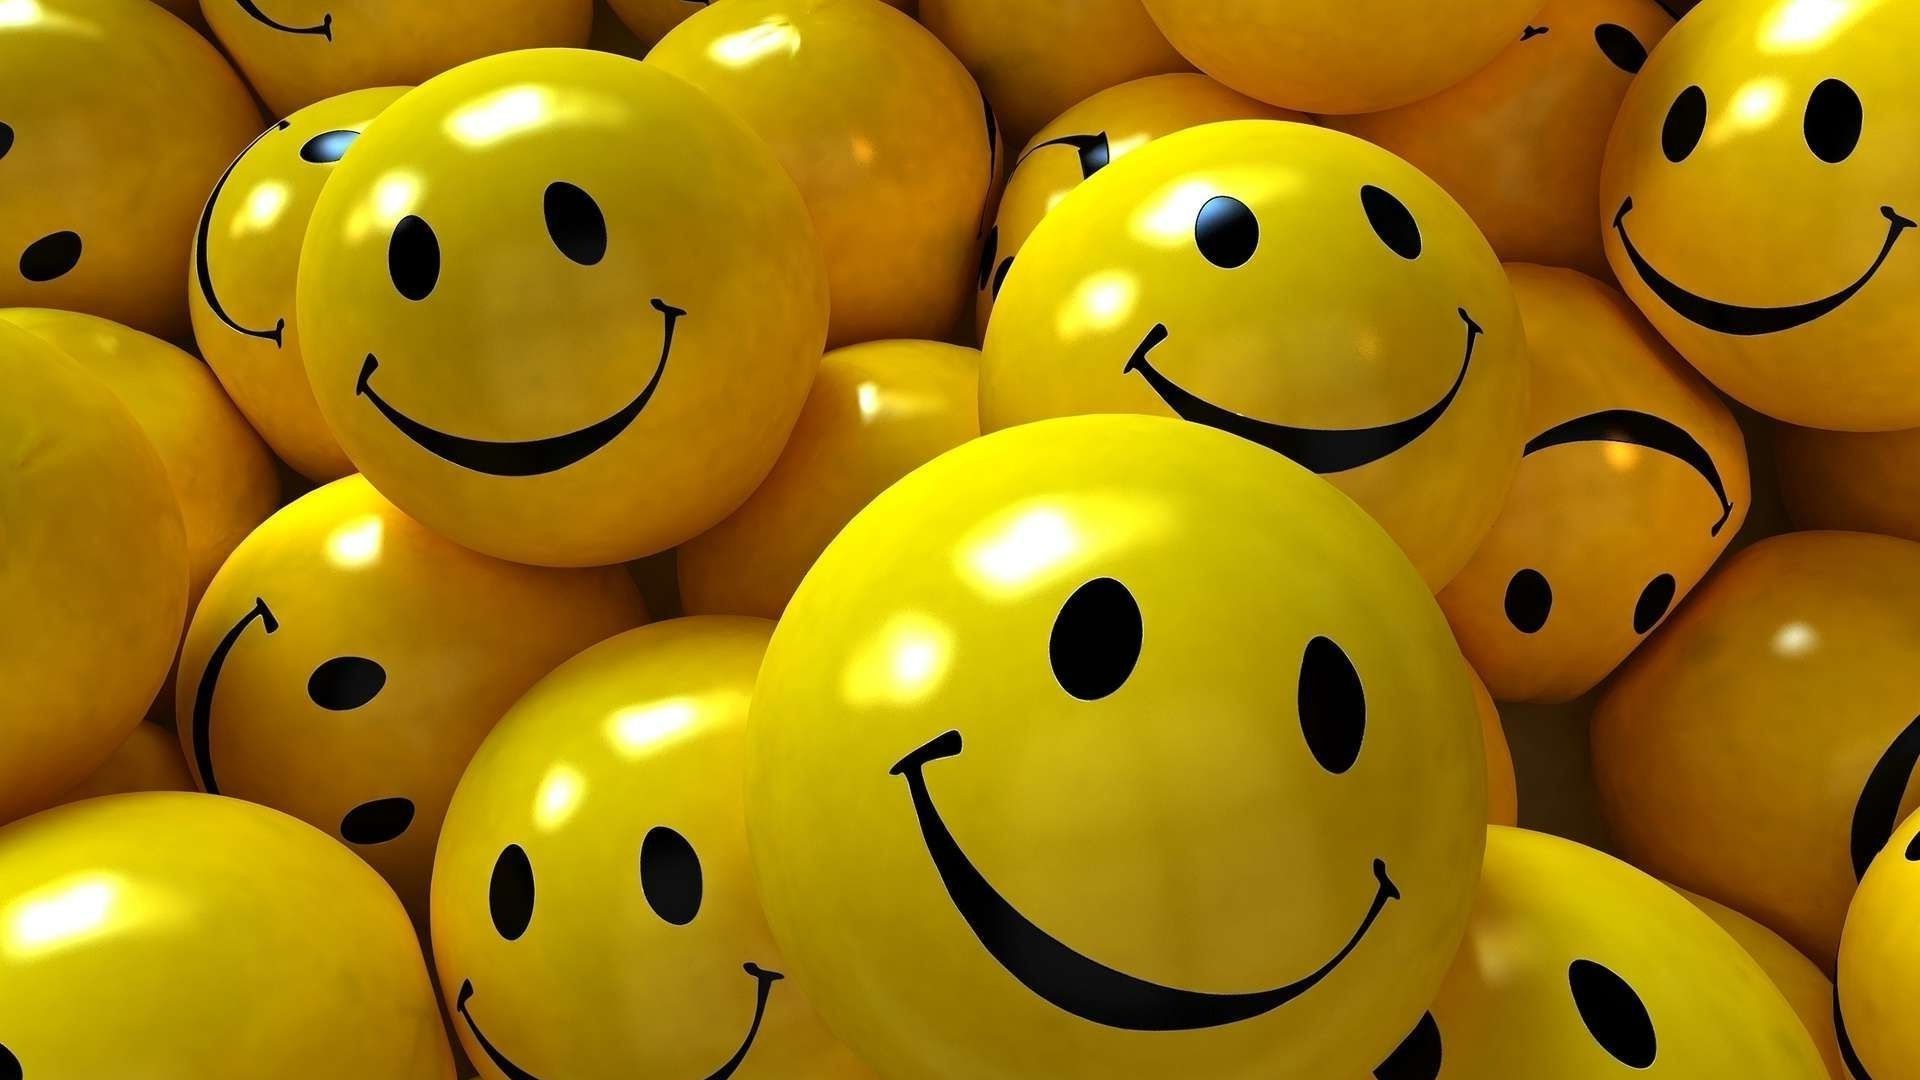 Cool Smiley Face Emoji Wallpaper ; Top Free Cool Smiley Face Emoji, Picture & Image Download